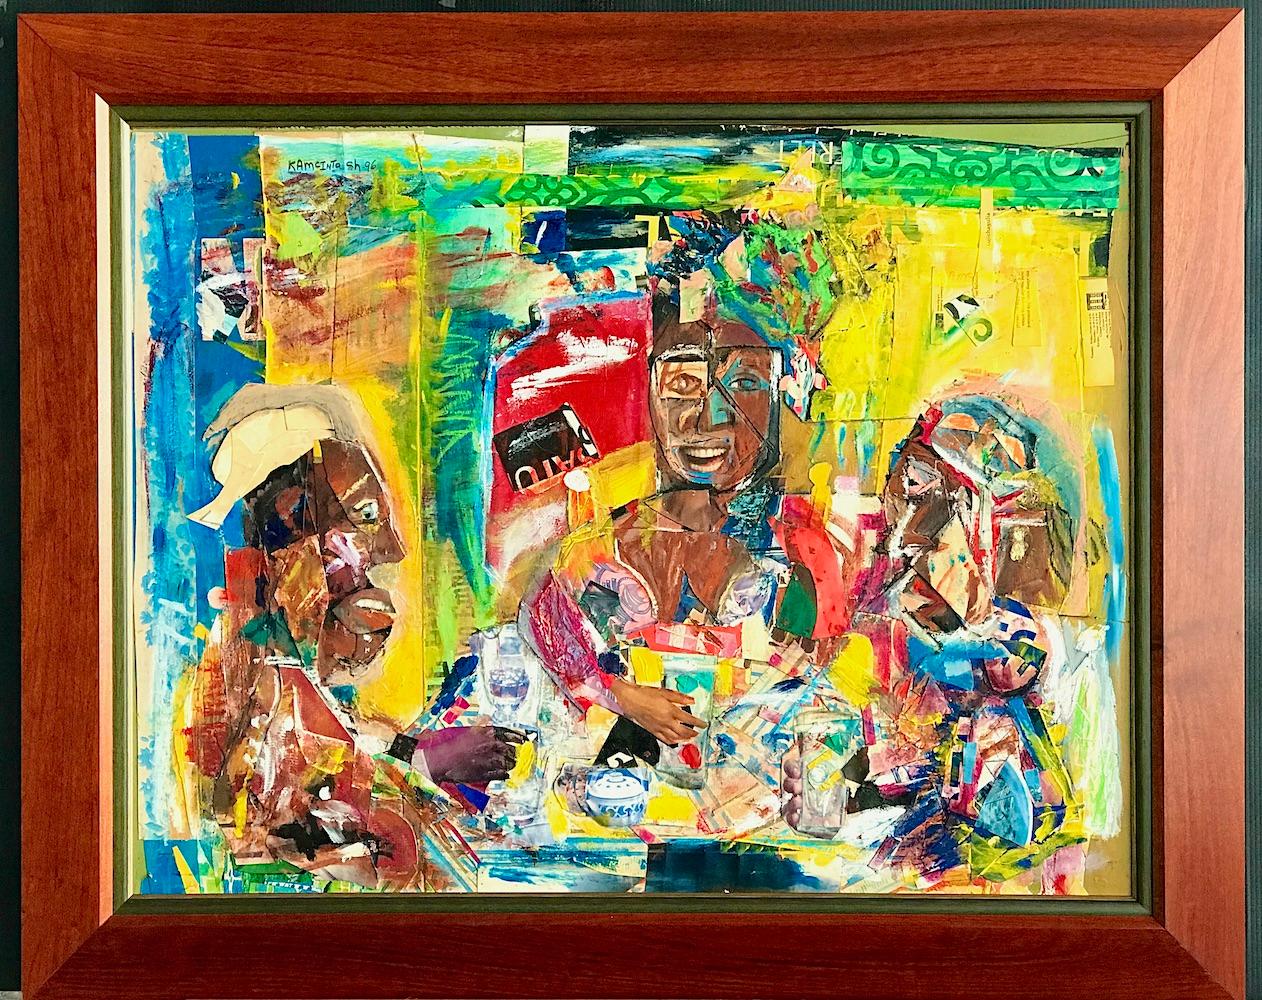 MORNING BREAKFAST Abstract Mixed Media Collage, Black People Having Breakfast - Outsider Art Mixed Media Art by Karl A. McIntosh